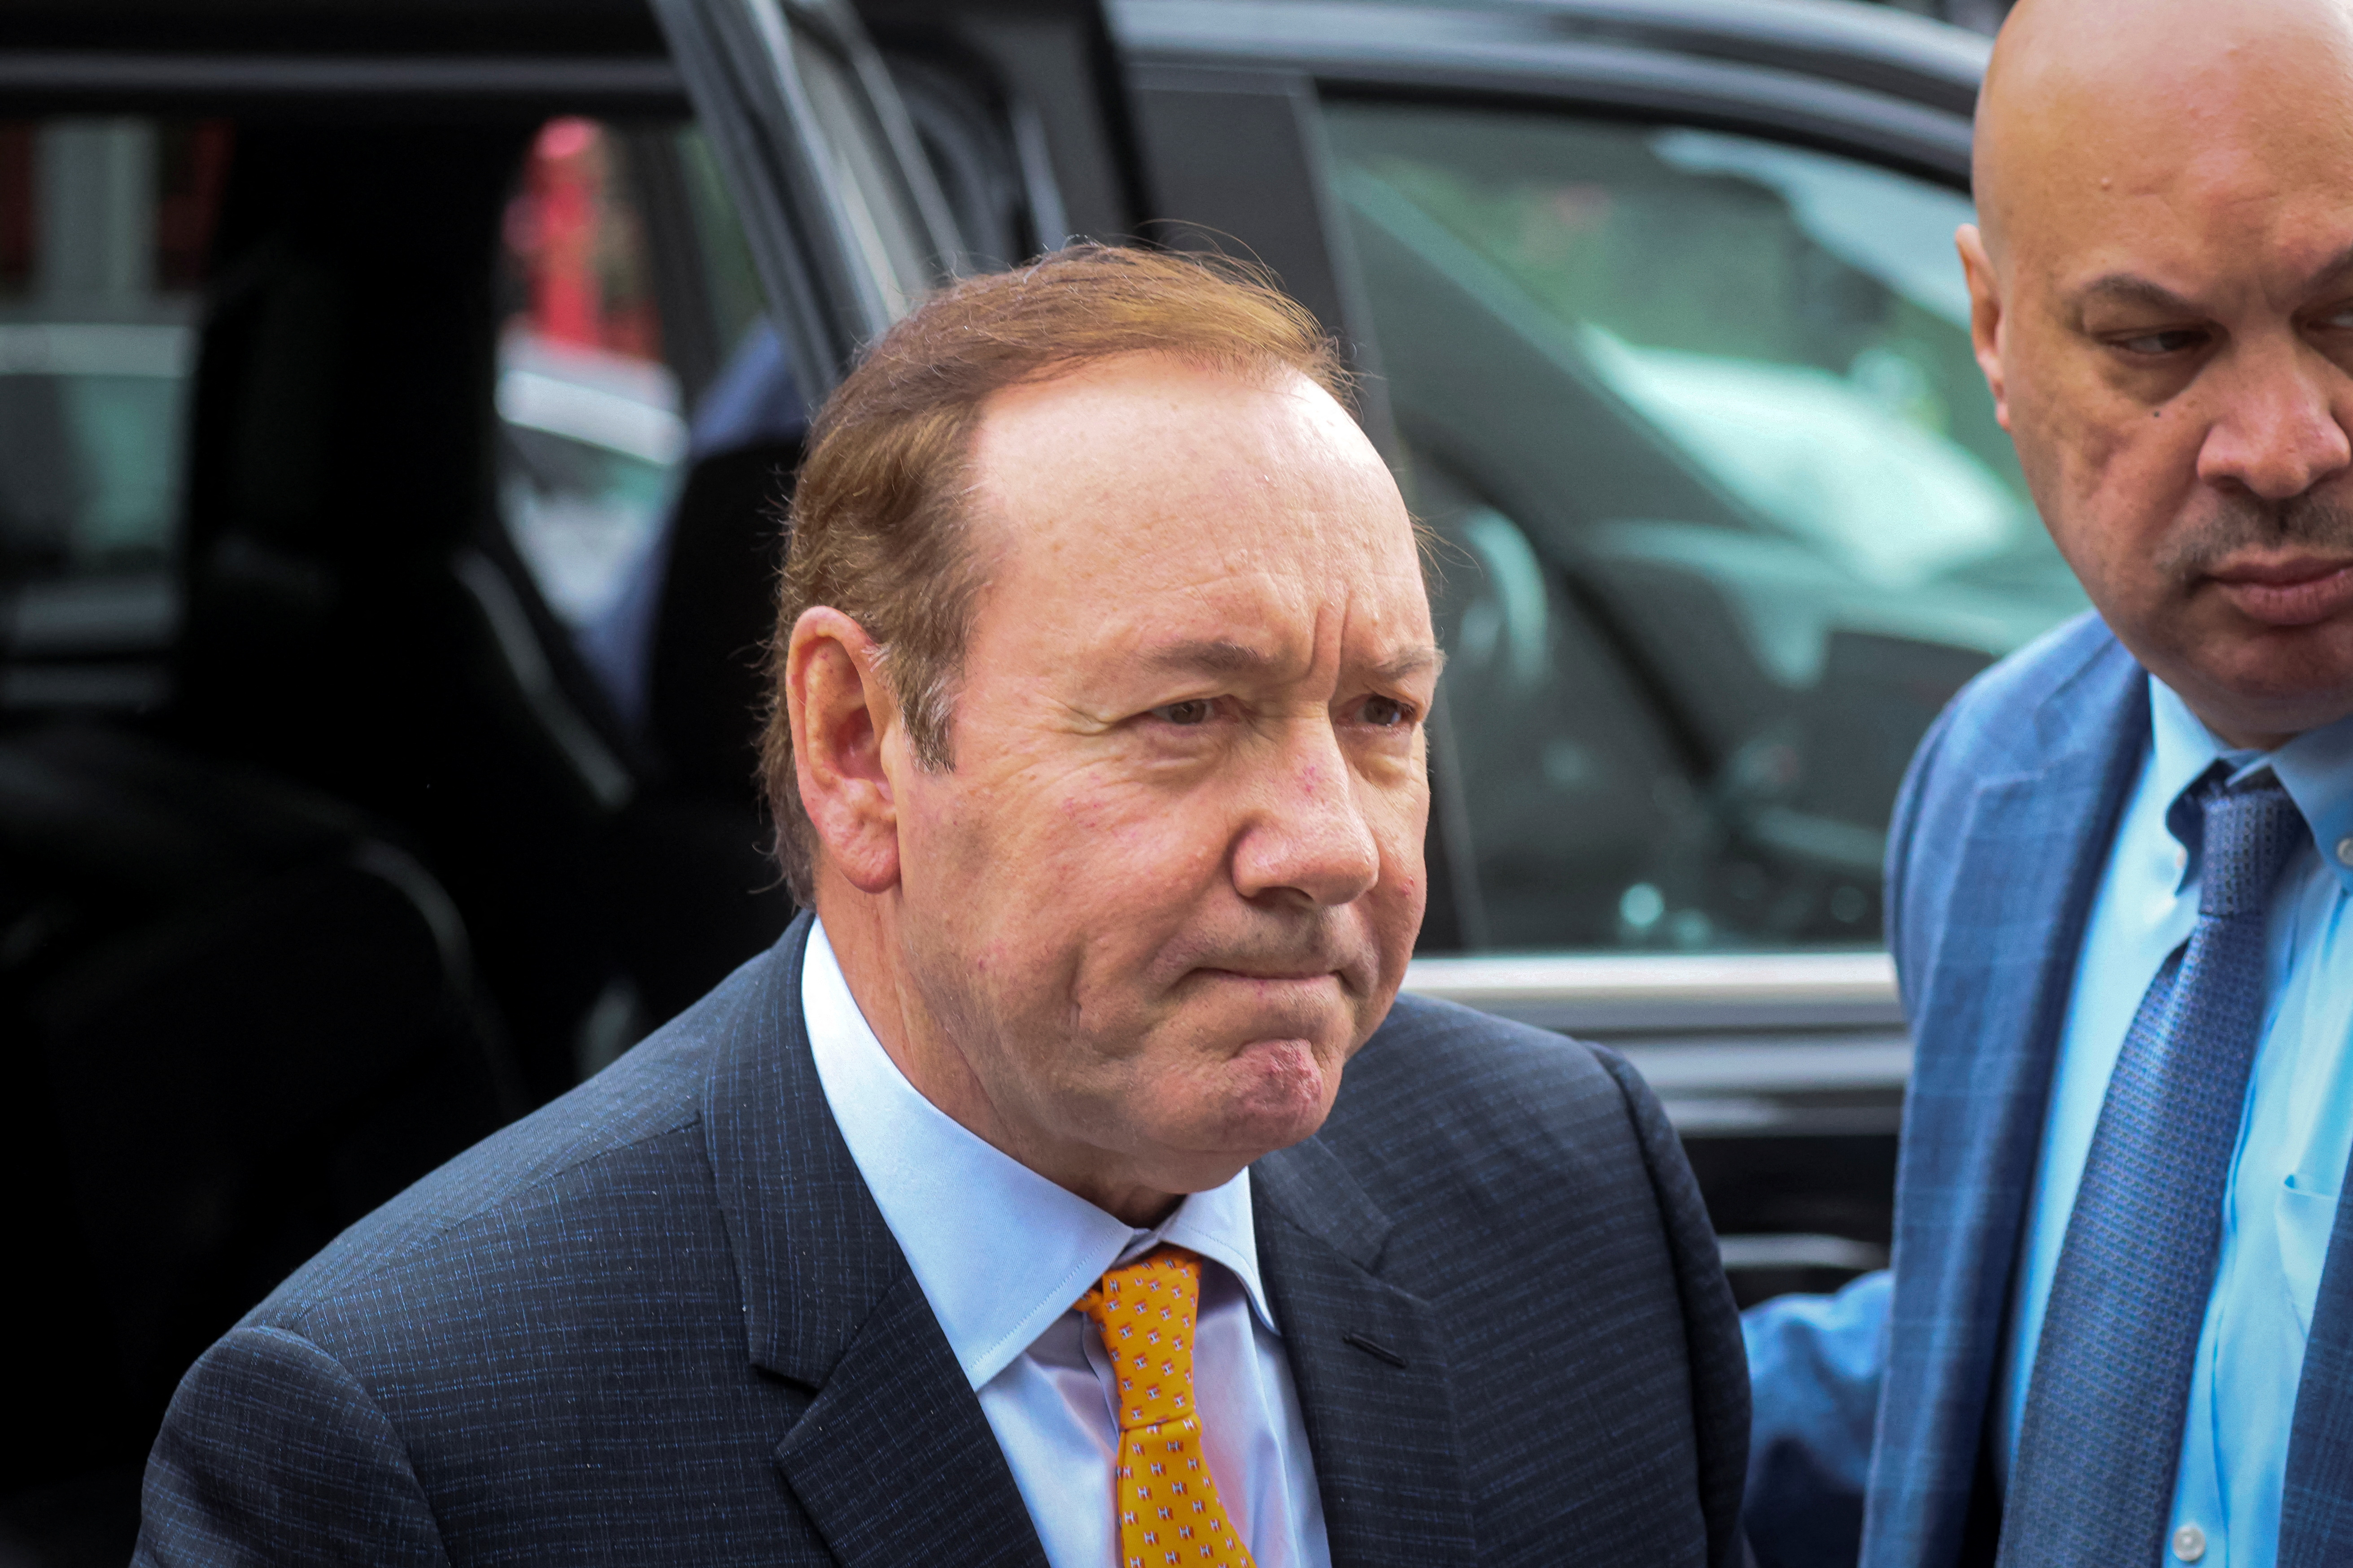 Kevin Spacey denies Anthony Rapp abuse claim, regrets apology Reuters